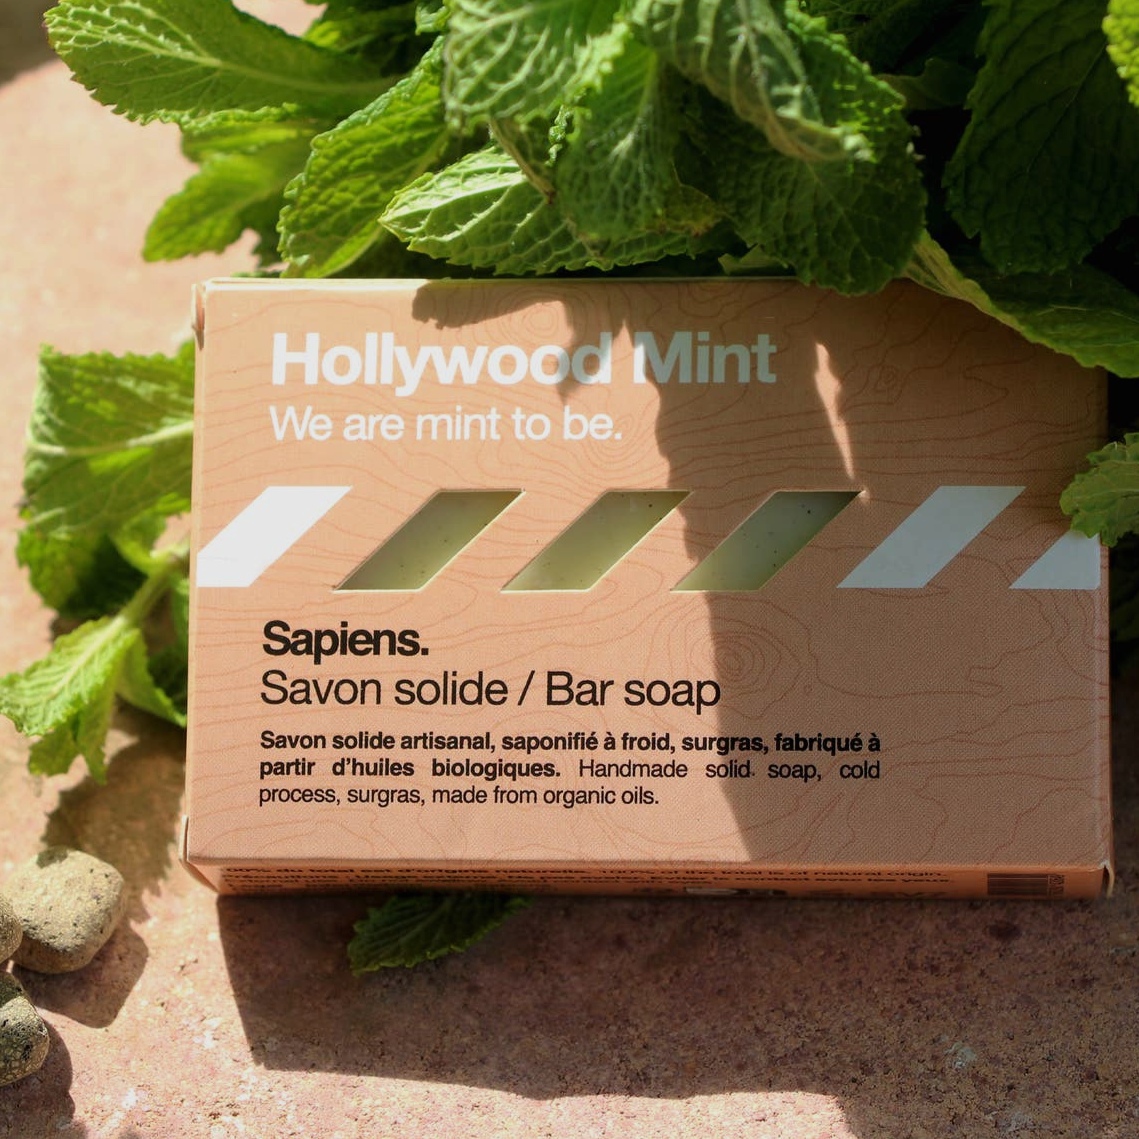 Sapiens Bar Soap Hollywood Mint - Genuine Design luxury consignment Calgary, Alberta, Canada New & pre-owned clothing, shoes, accessories.